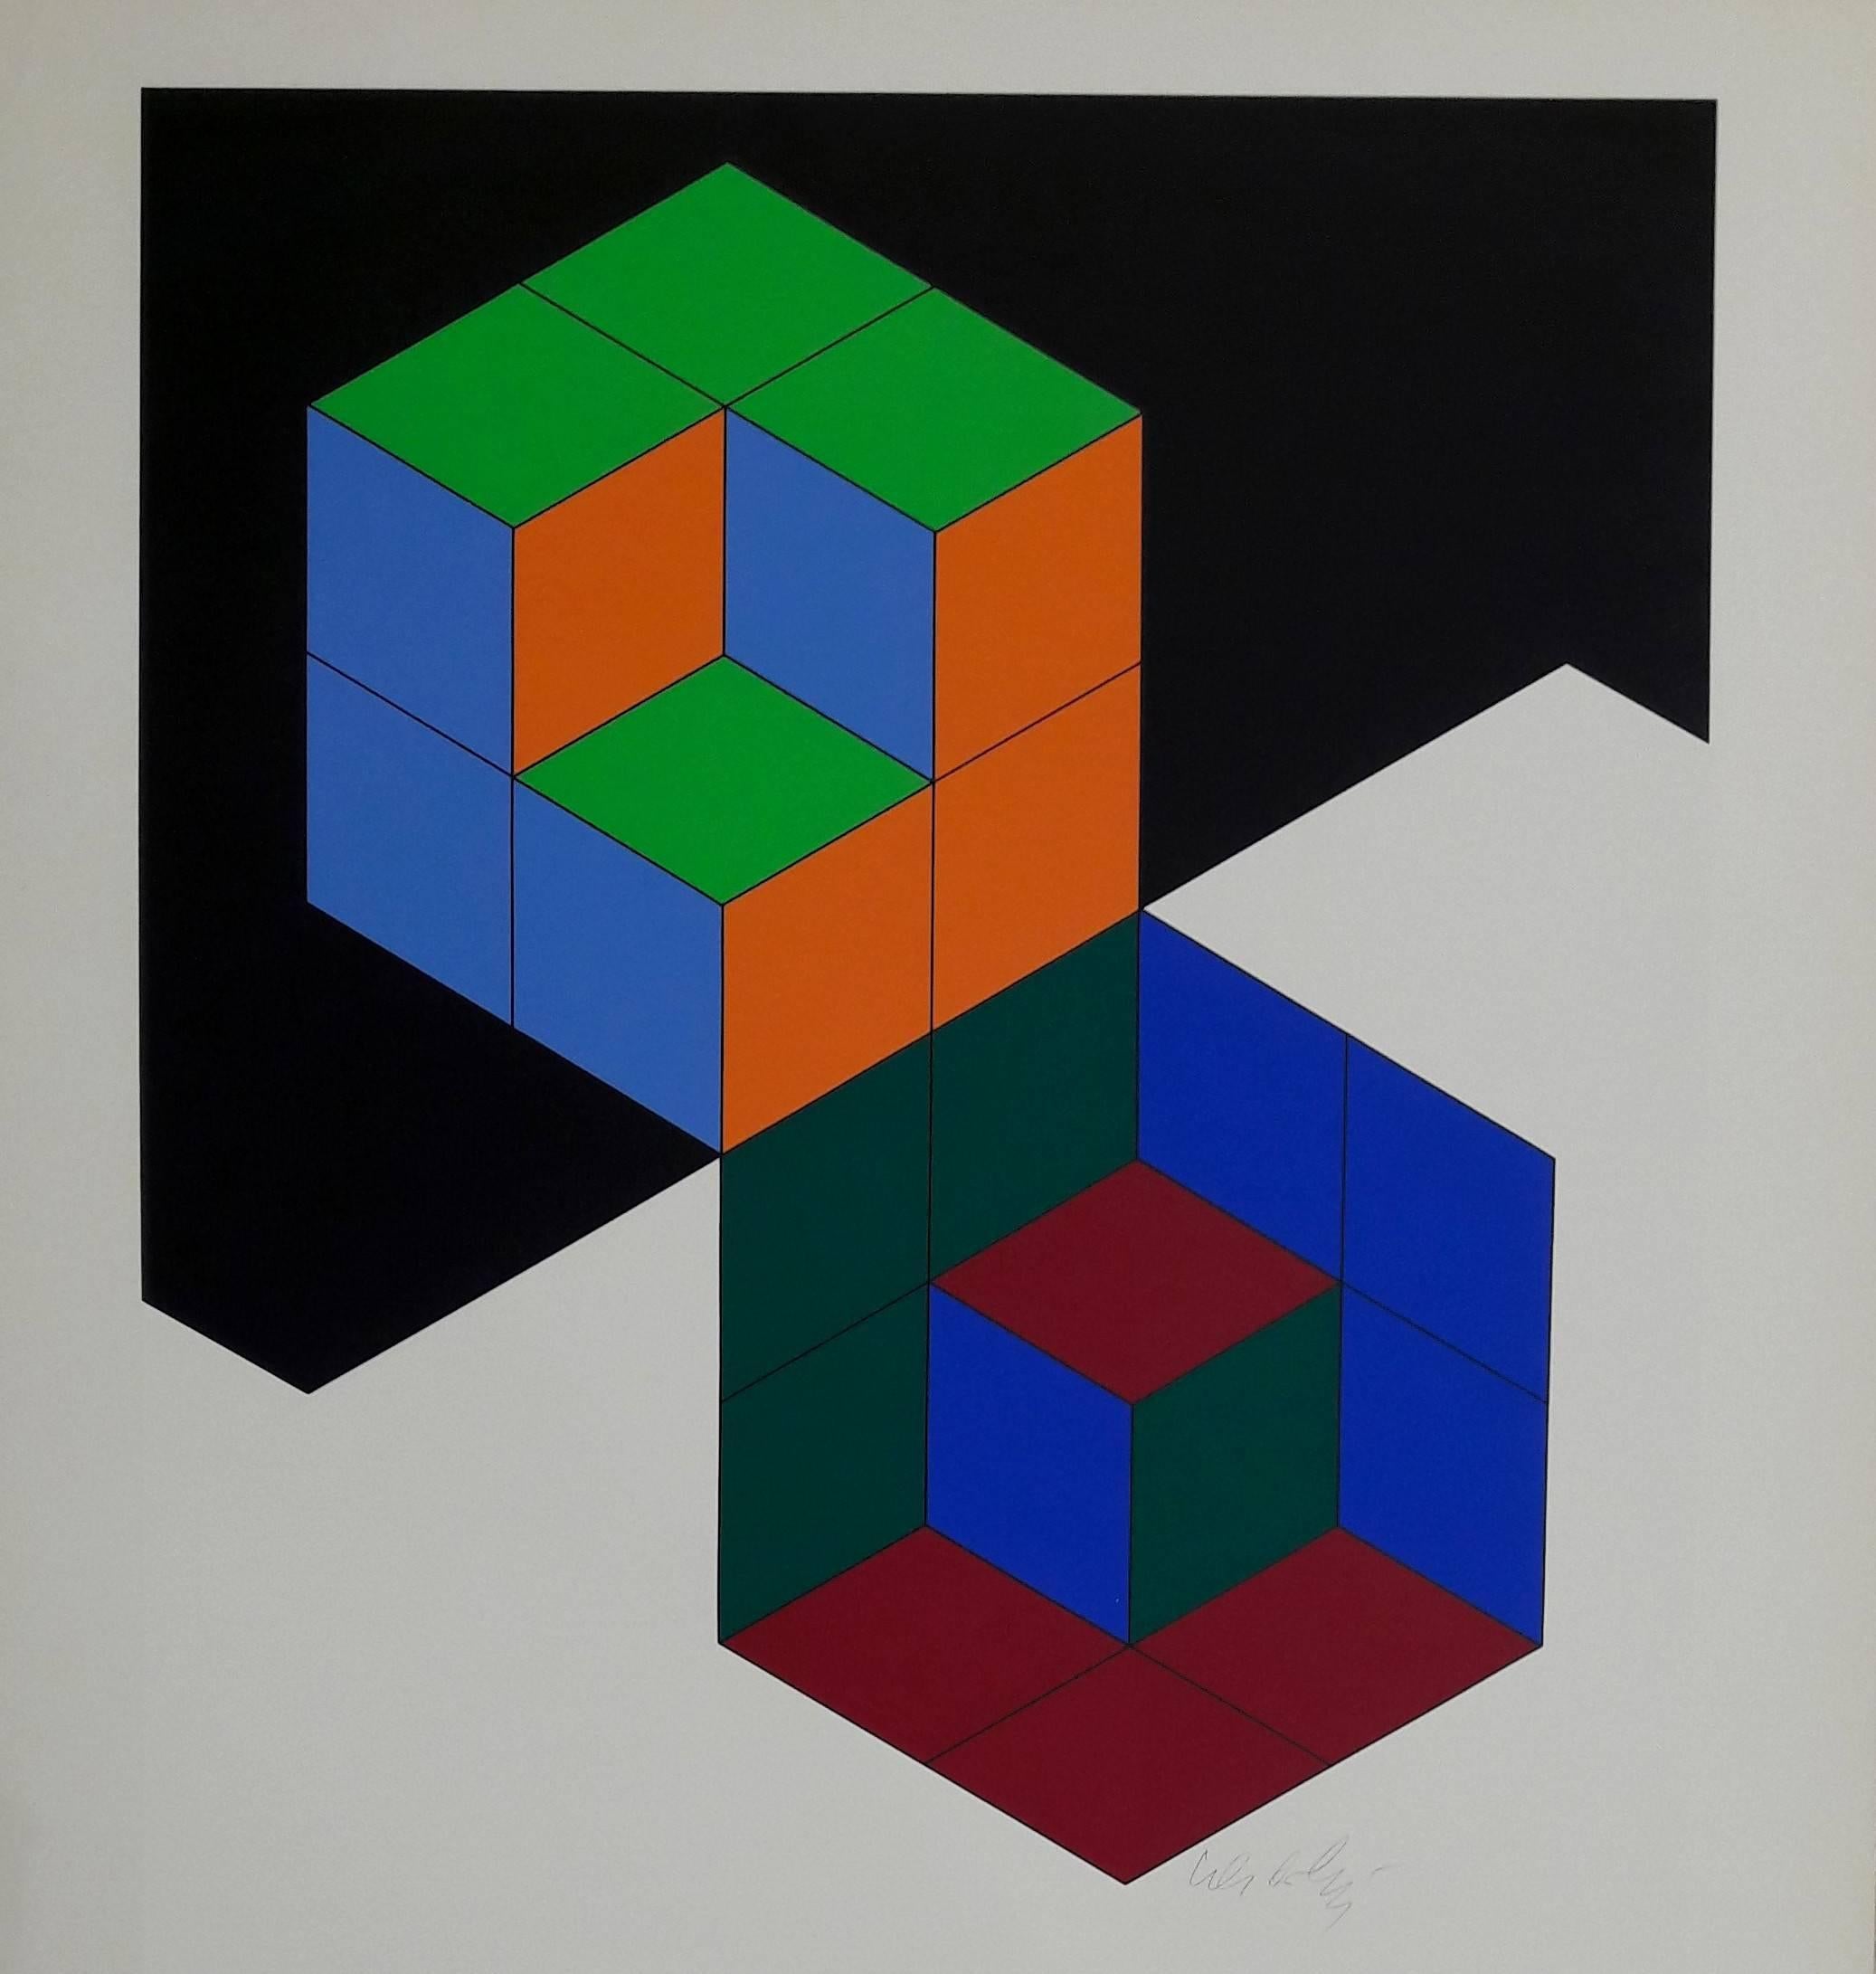 Victor VASARELY
Hexa 

Original Screen Print 
Handsigned in pencil
Numbered / 300 copies
On Arches, 76 x 56 cm (c. 29,9 x 22 in)

Very good condition, but very light fold at the top left and top right corner.